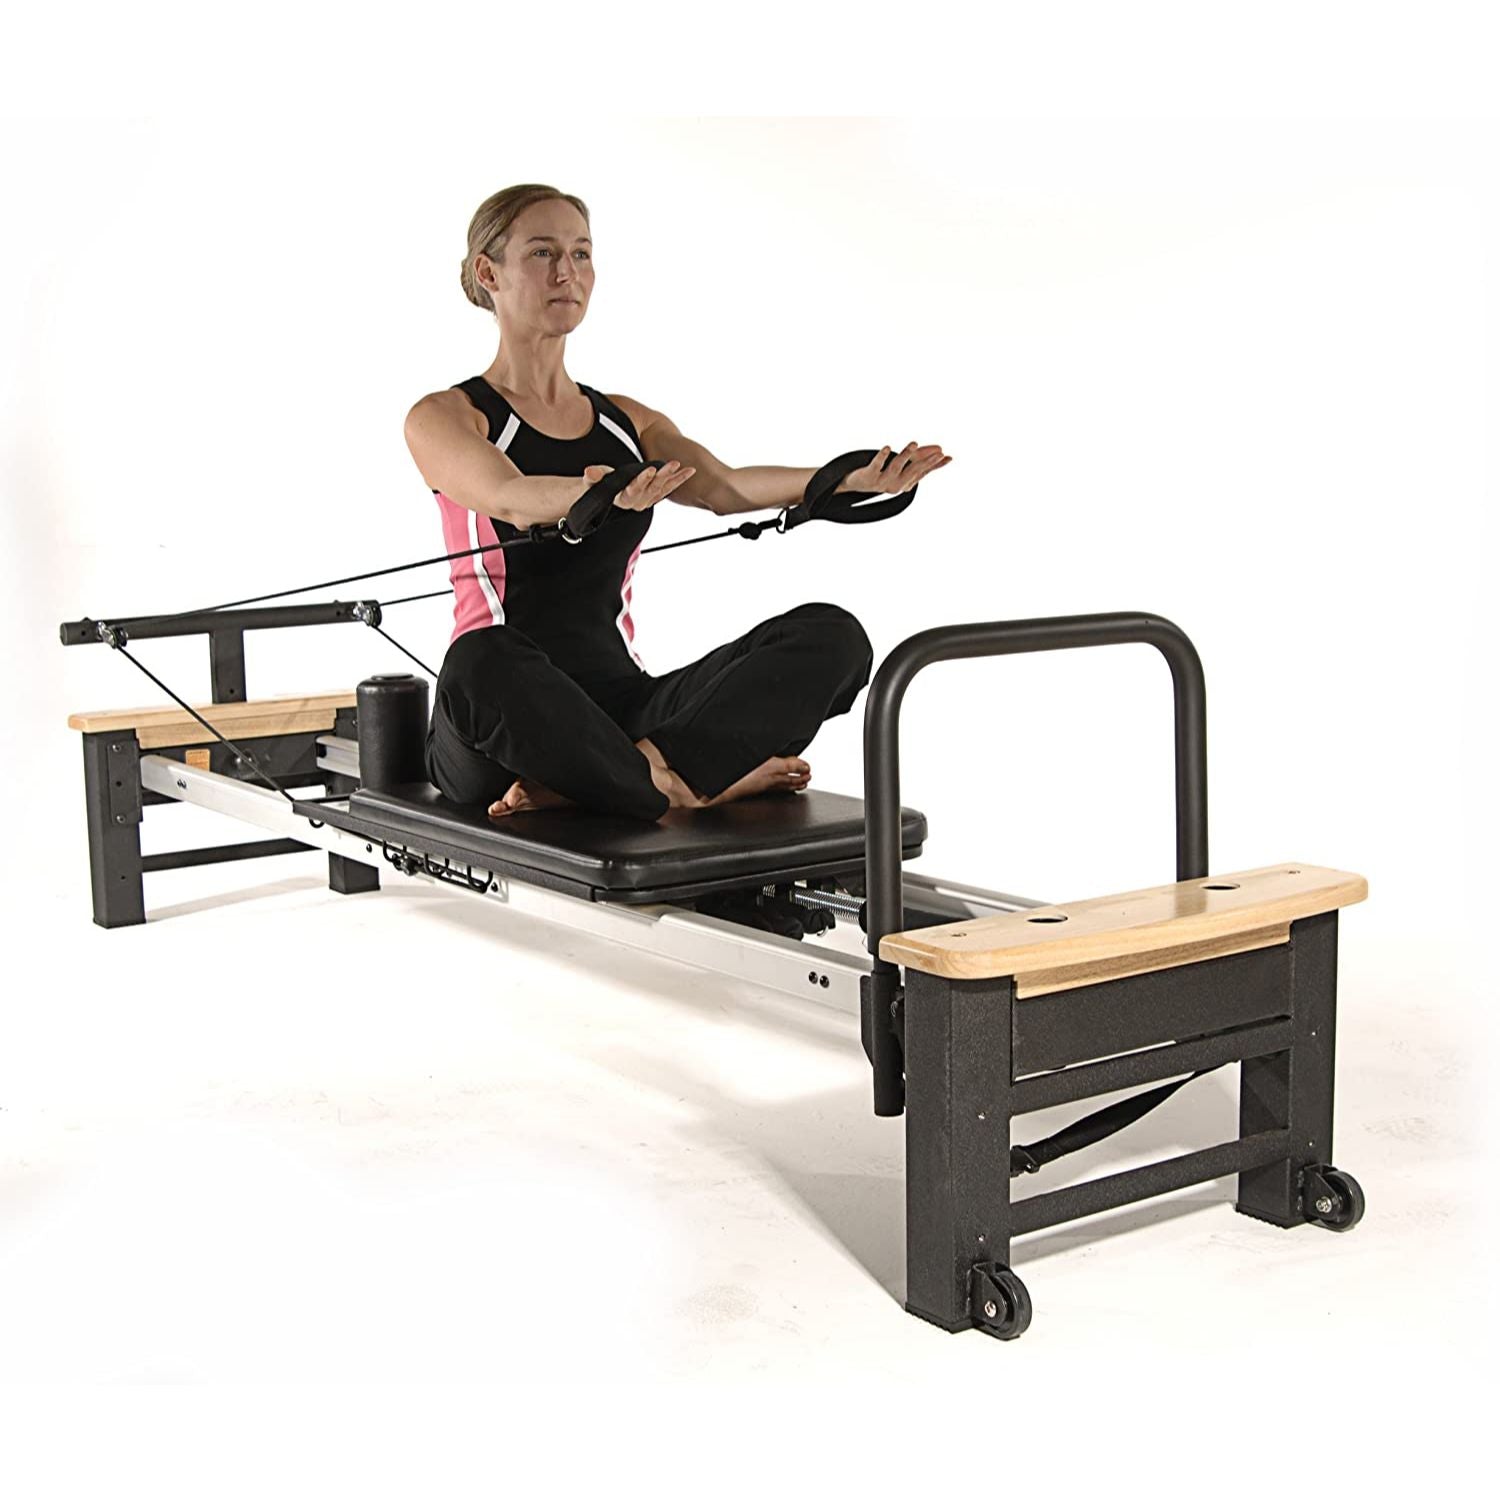 AeroPilates Pro Series Reformer - Pilates Reformer Workout Machine for Home  Gym - Cardio Fitness Rebounder - Up to 300 lbs Weight Capacity